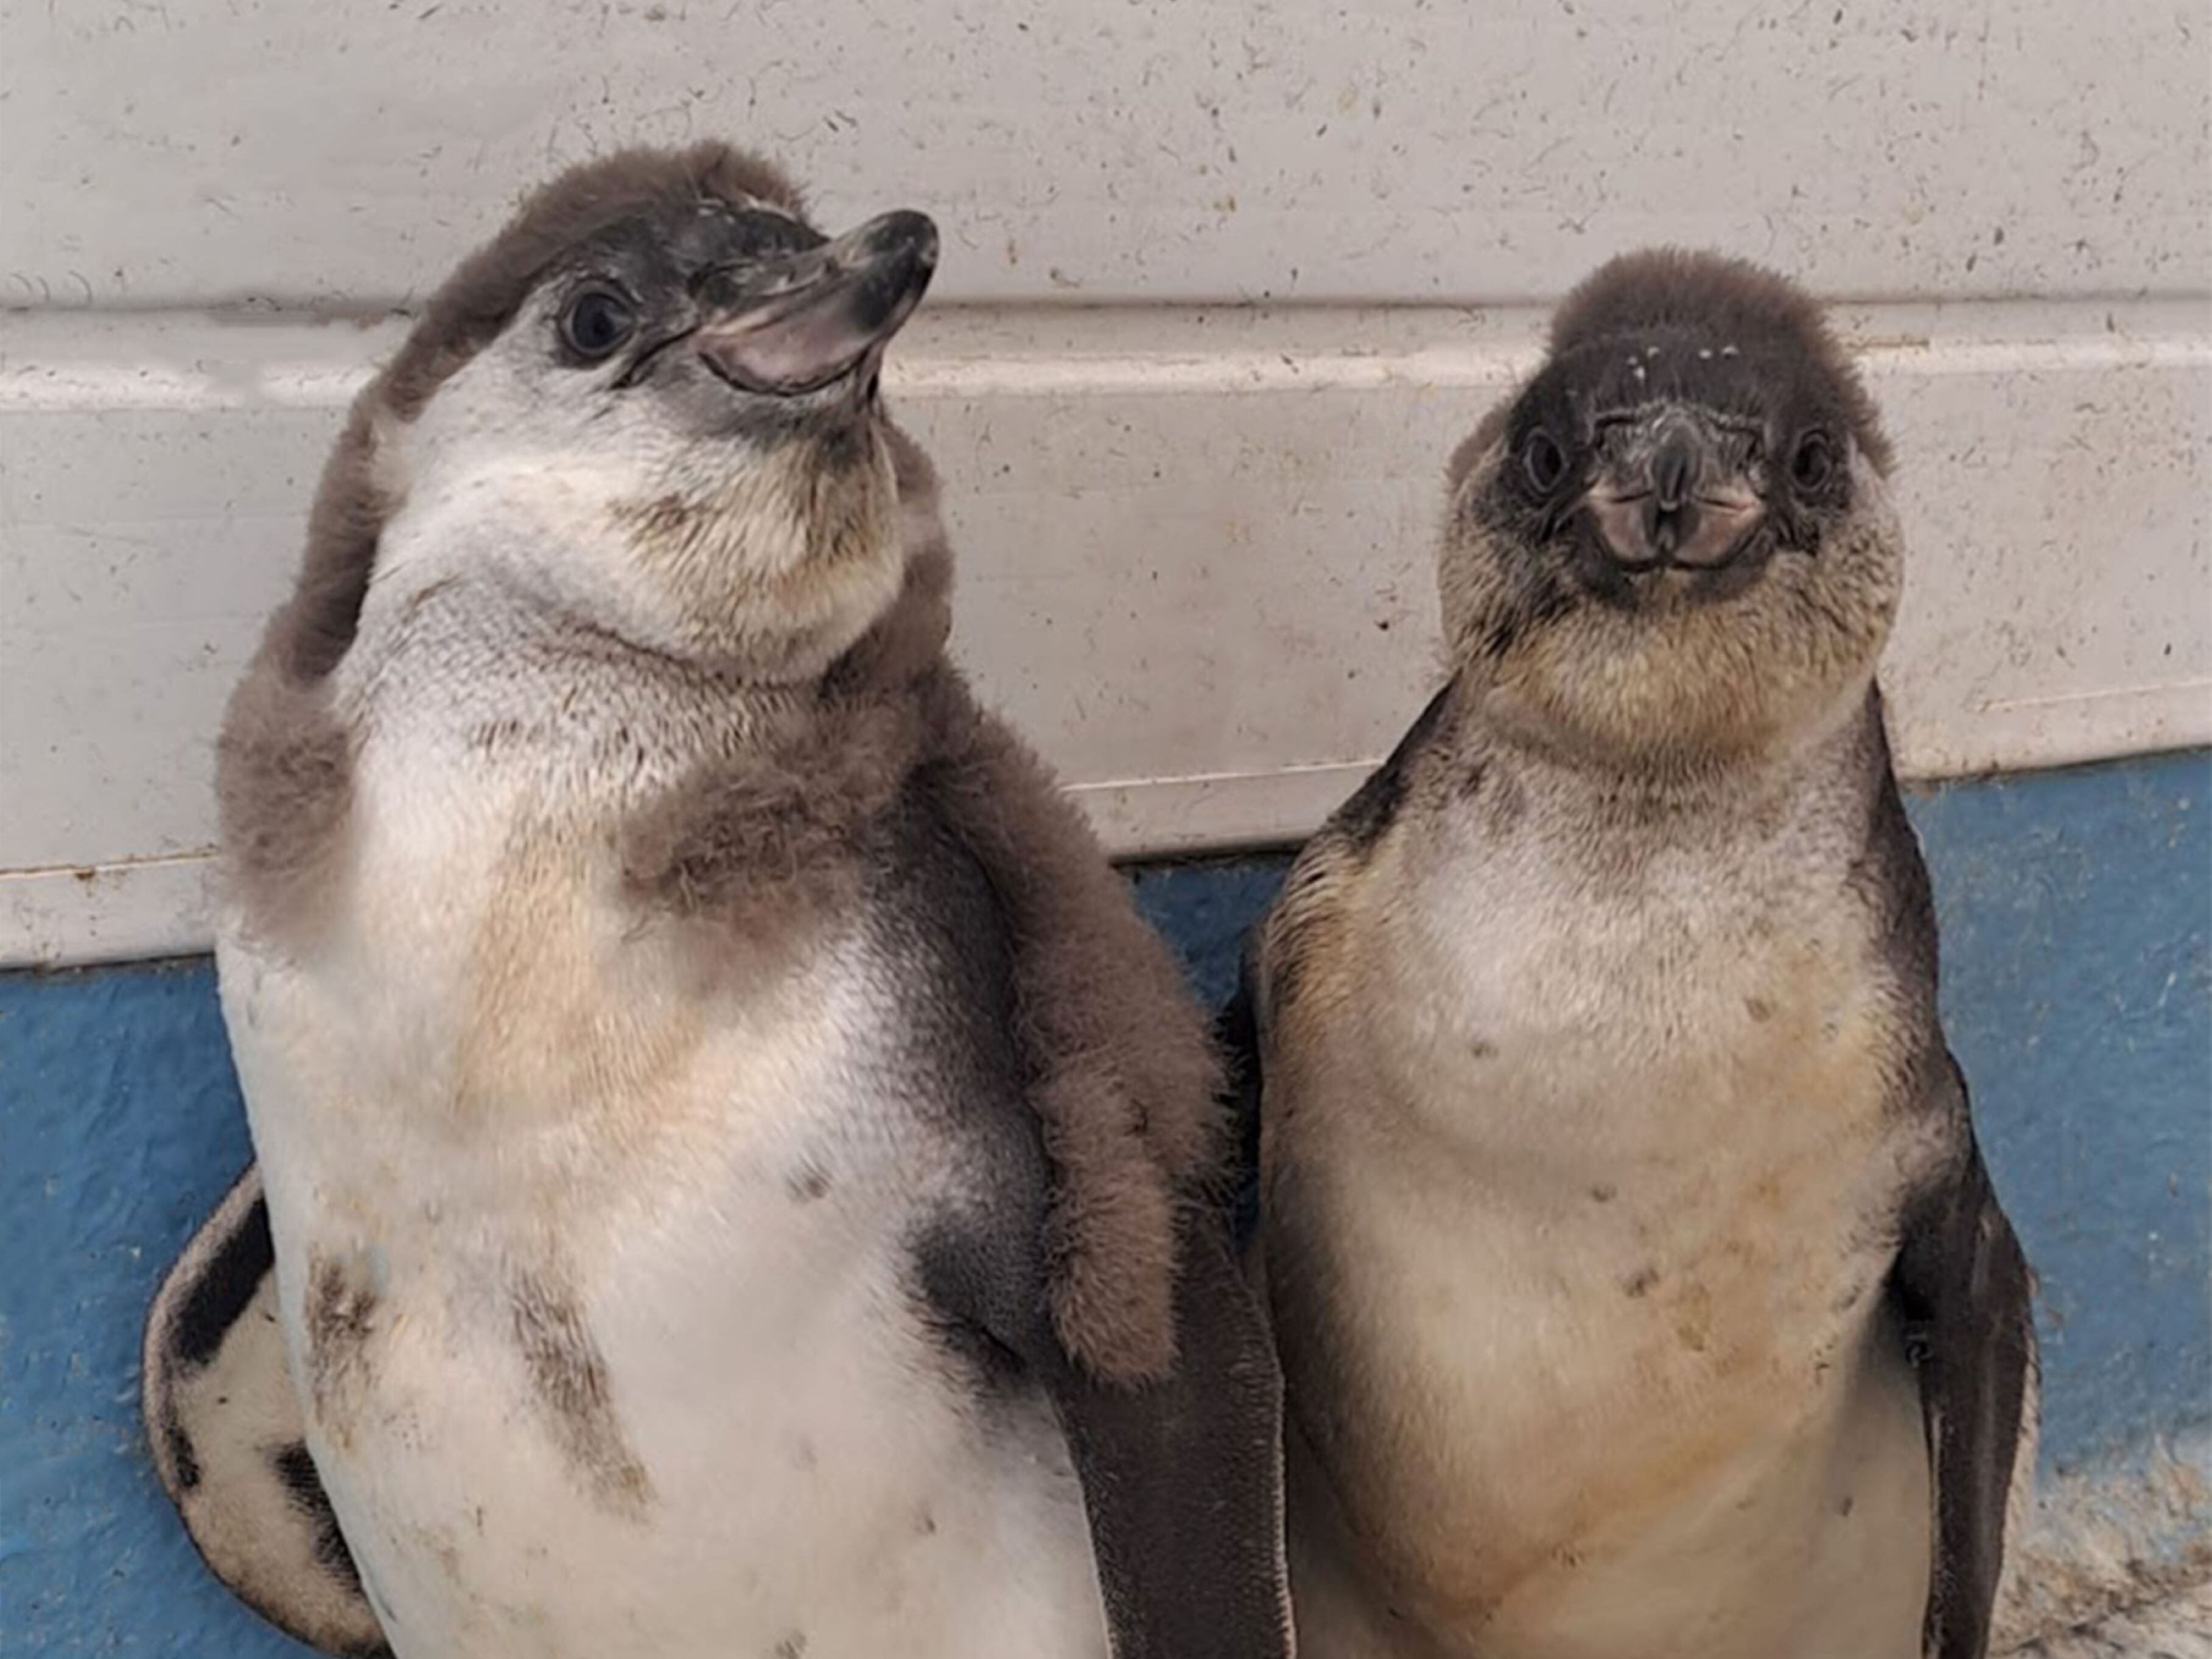 Keepers at Dudley Zoo need help naming adorable penguin chicks